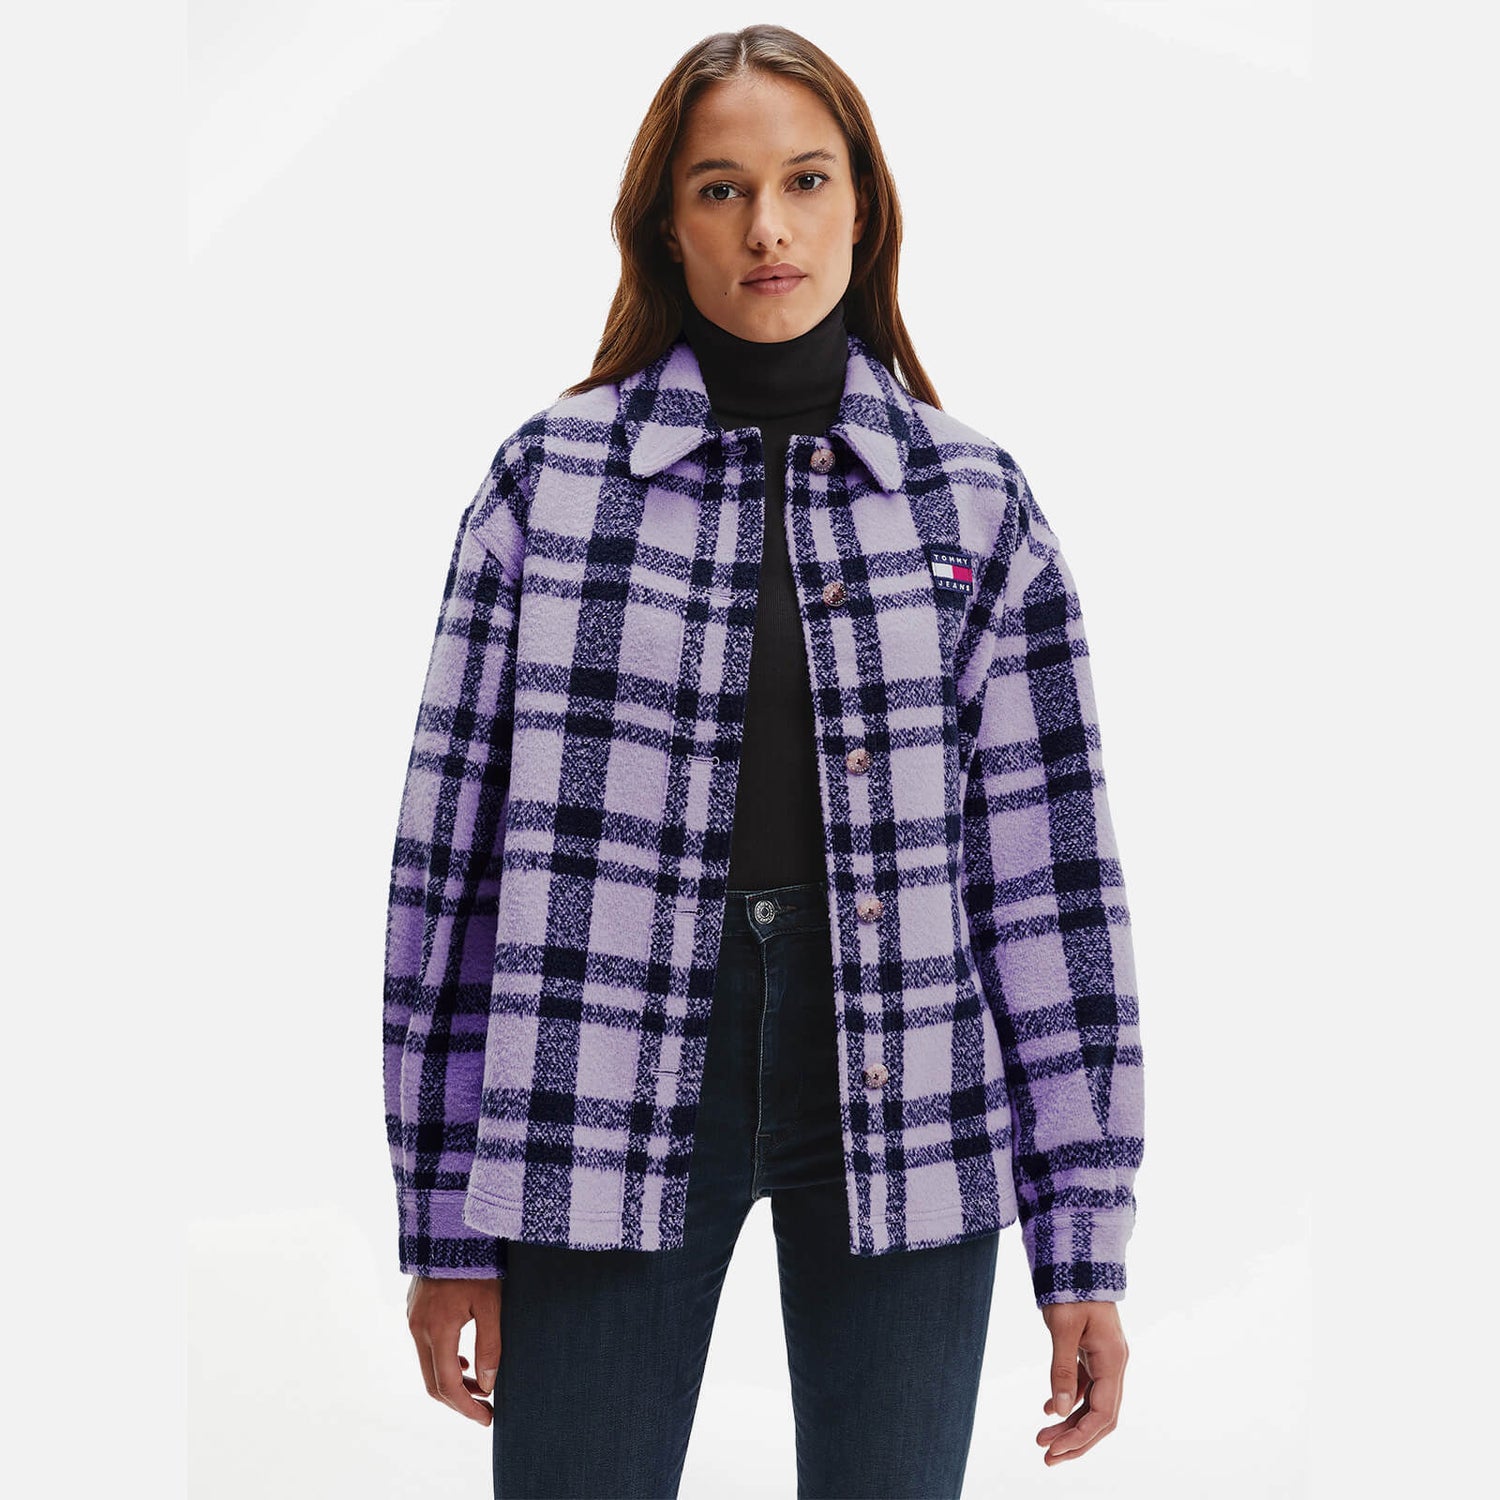 Tommy Jeans Women's Tjw Bright Check Overshirt - Violet Plaid - XS